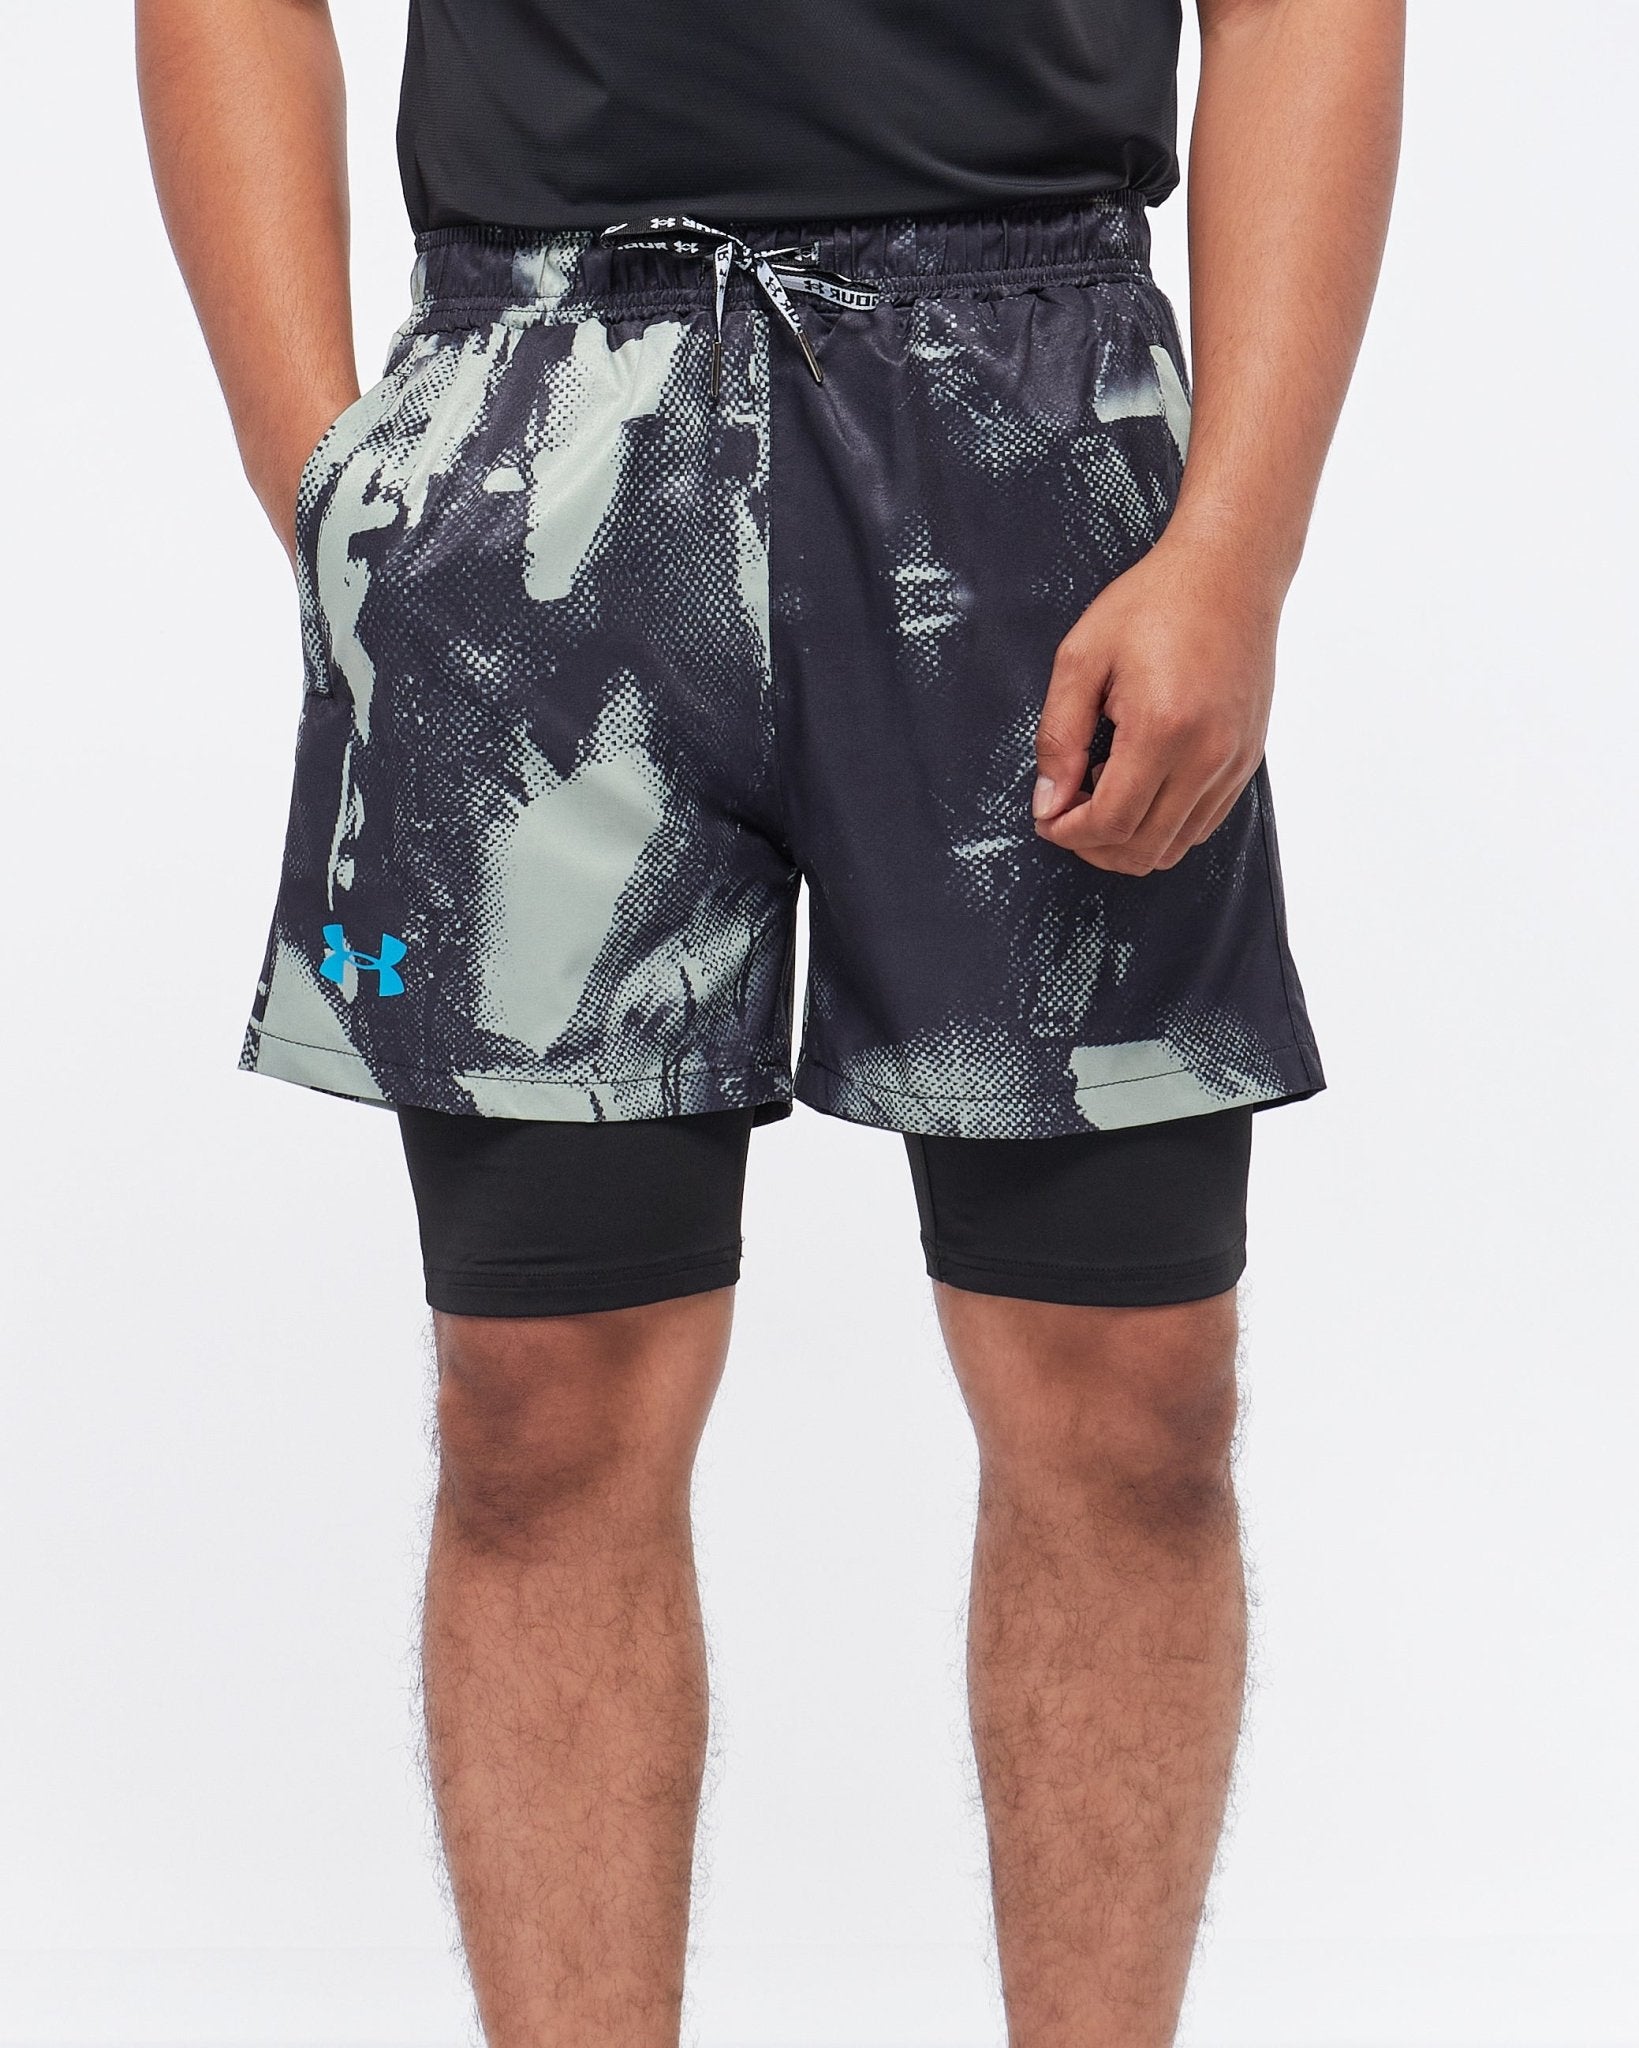 MOI OUTFIT-UA Camo Printed 2 in 1 Men Sport Shorts 14.90